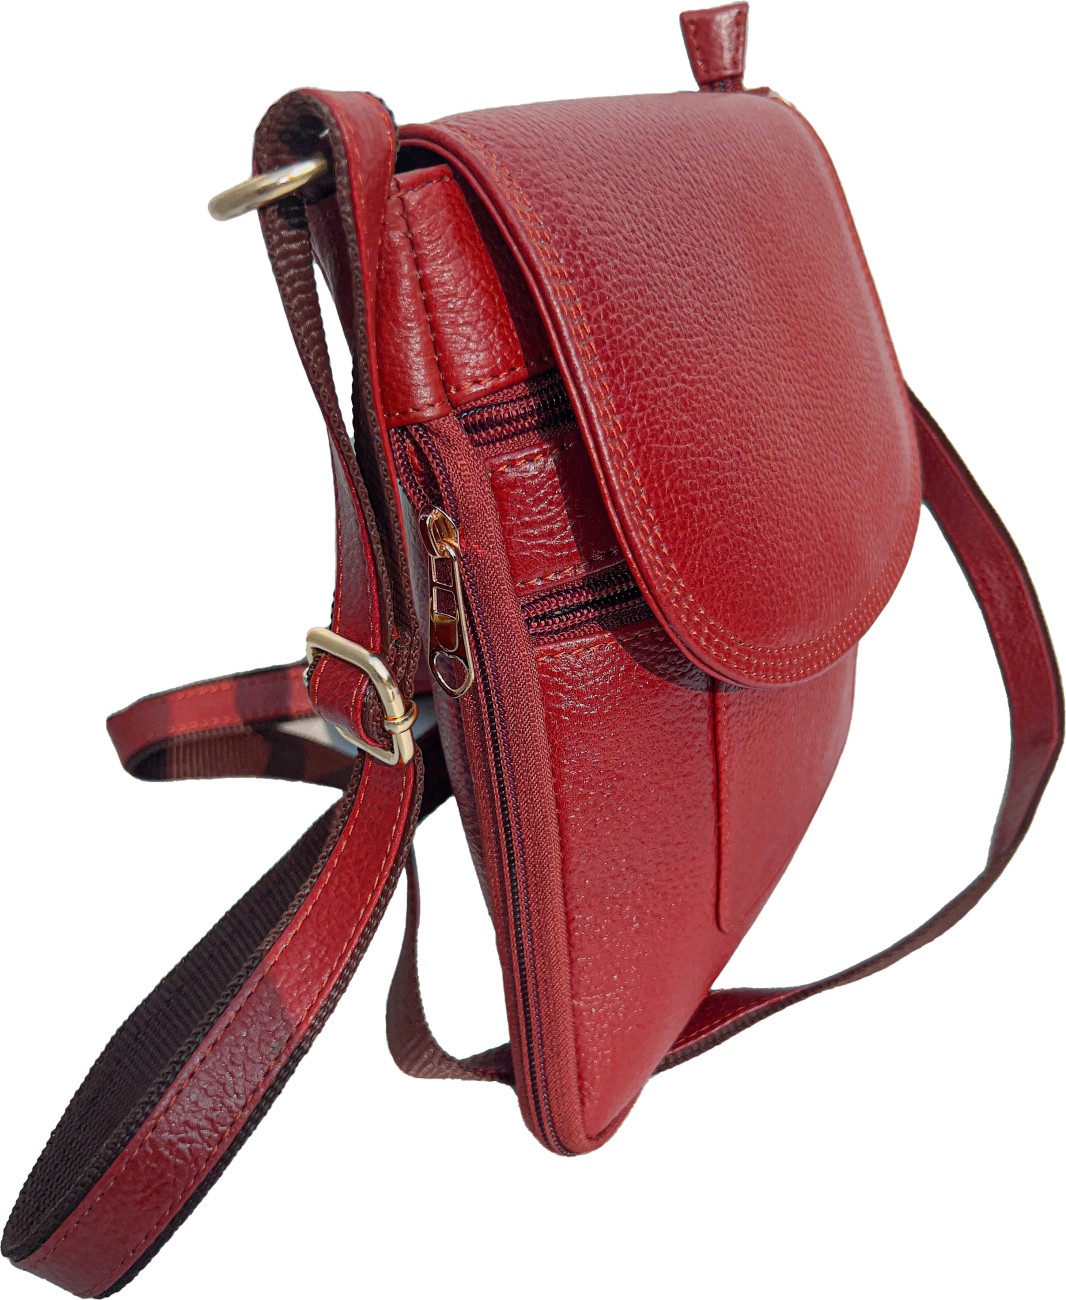 Amiro Red Sling Bag bag01 red - Price in India